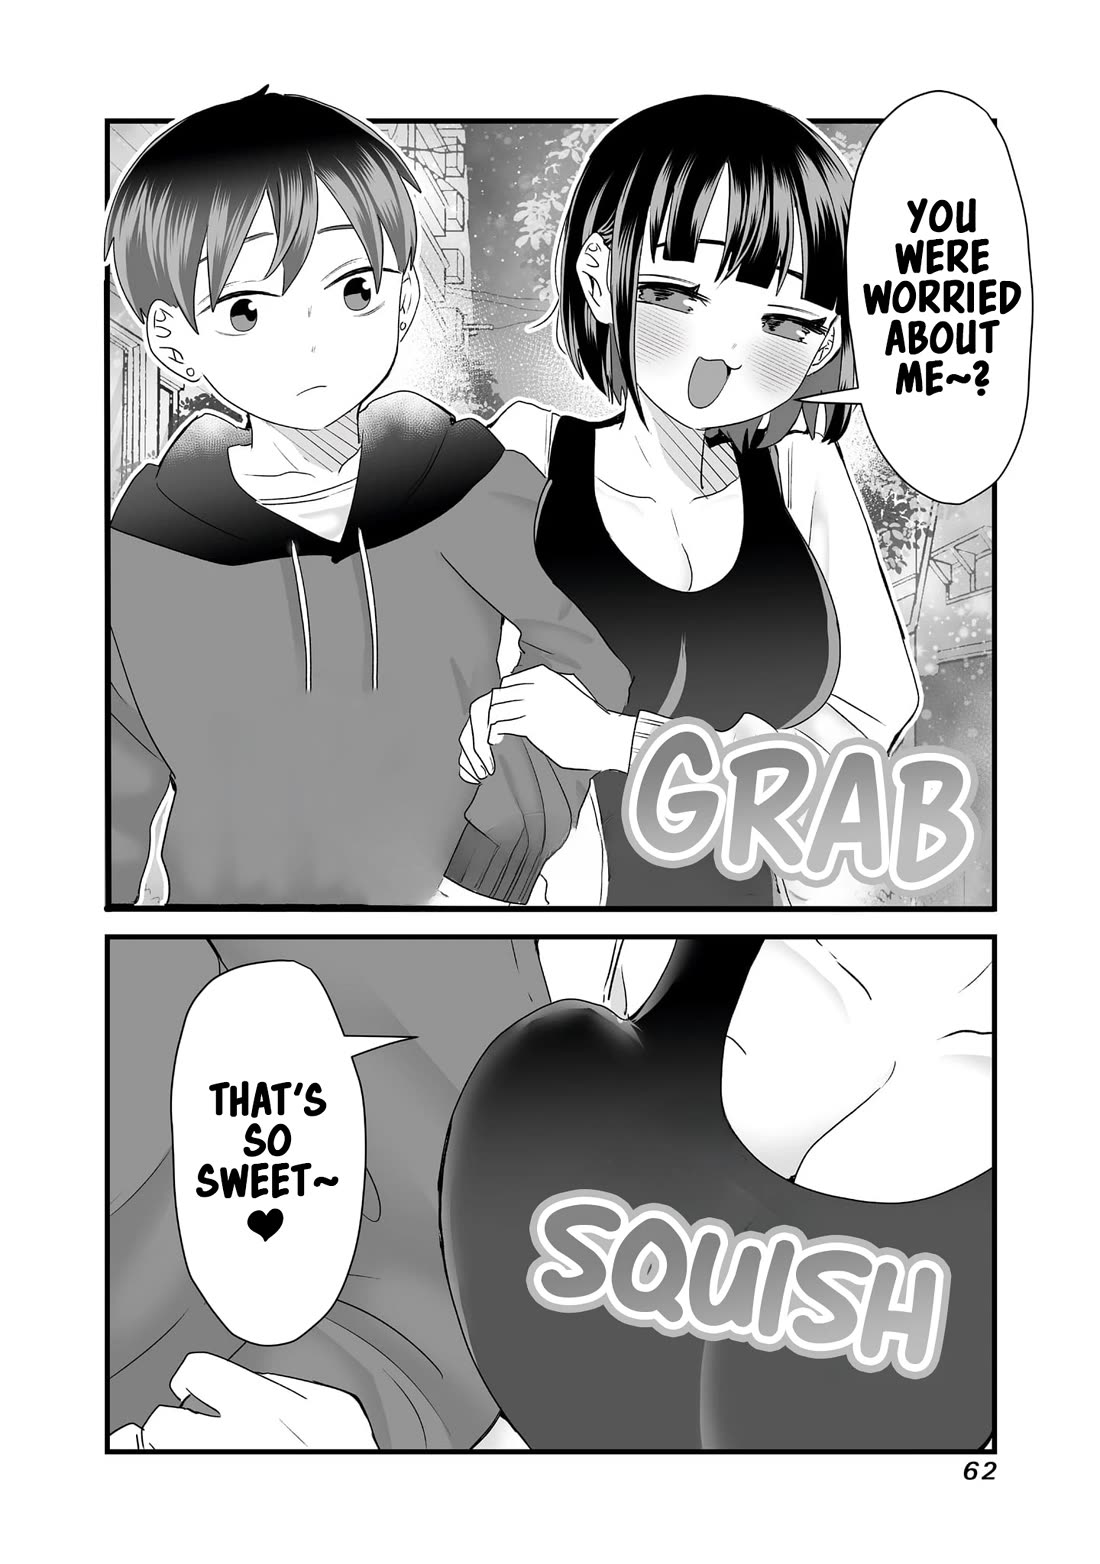 Sacchan and Ken-chan Are Going at it Again - chapter 7 - #6